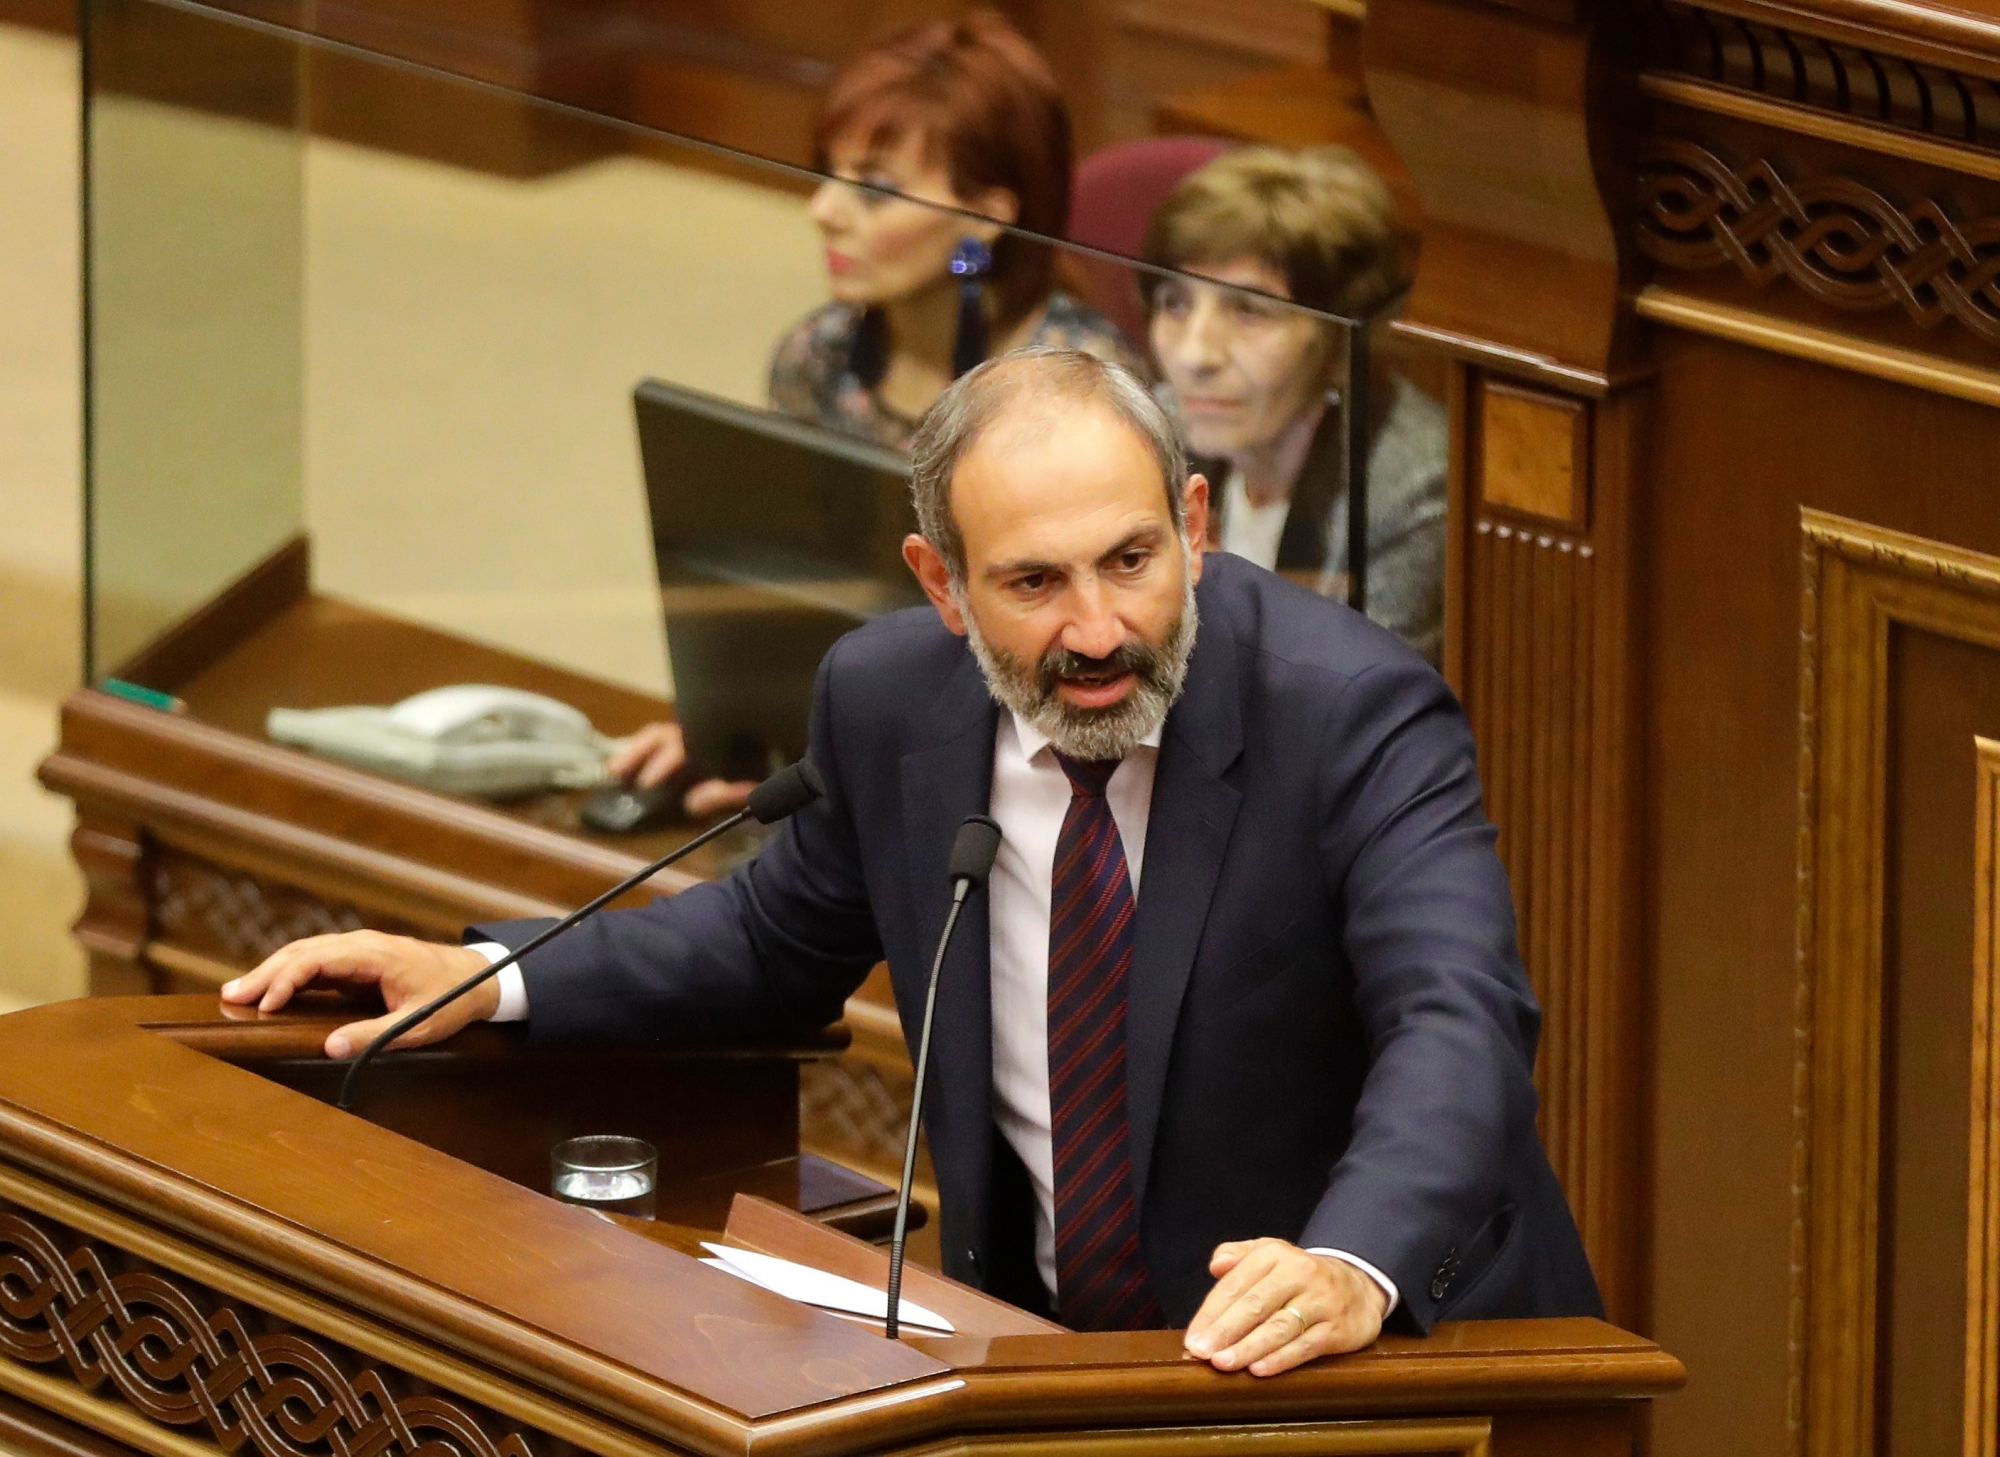 Opposition lawmaker Nikol Pashinian speaks during a parliament session to choose a replacement of Prime Minister in Yerevan on Tuesday, May 1, 2018. Nikol Pashinian, the opposition lawmaker who sparked two weeks of protests that threw Armenia into a political crisis, so far is the only candidate formally nominated for the prime minister's post. (AP Photo/Sergei Grits) Armenia Politics